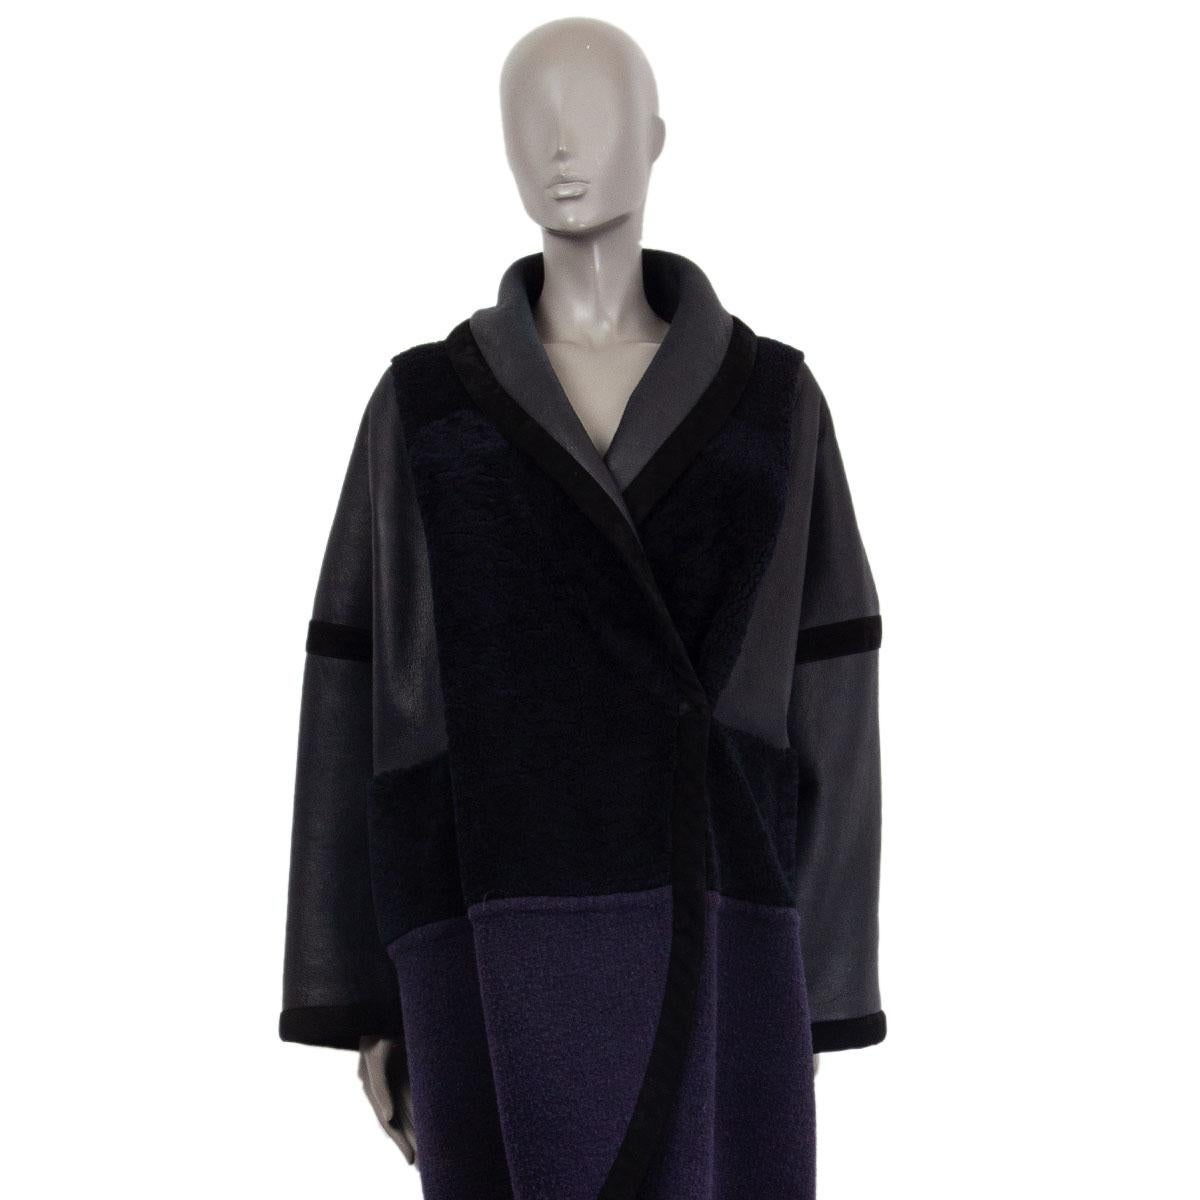 Chloé oversized coat in dark navy and black lambskin (100%), alpaca (55%), virgin wool (30%) and nylon (15%). Closes with one button. Unlined. Has been worn and is in excellent condition. 

Tag Size 40 
Size M
Bust 138cm (53.8in)
Waist 138cm